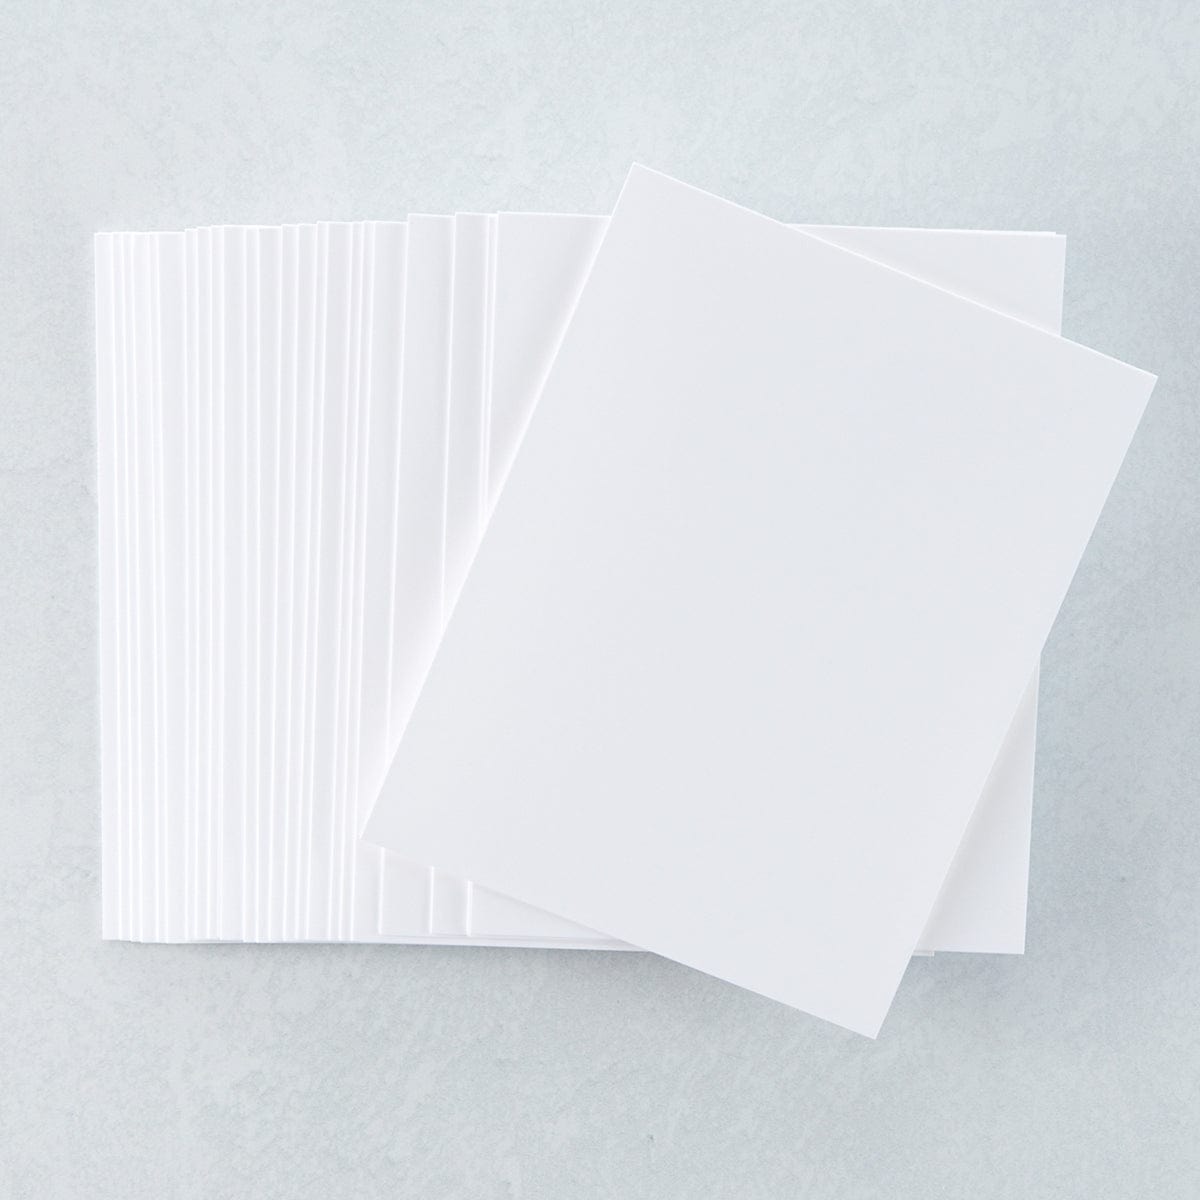 Classic Crest Blank A2 Folded Cards for thank you note cards and